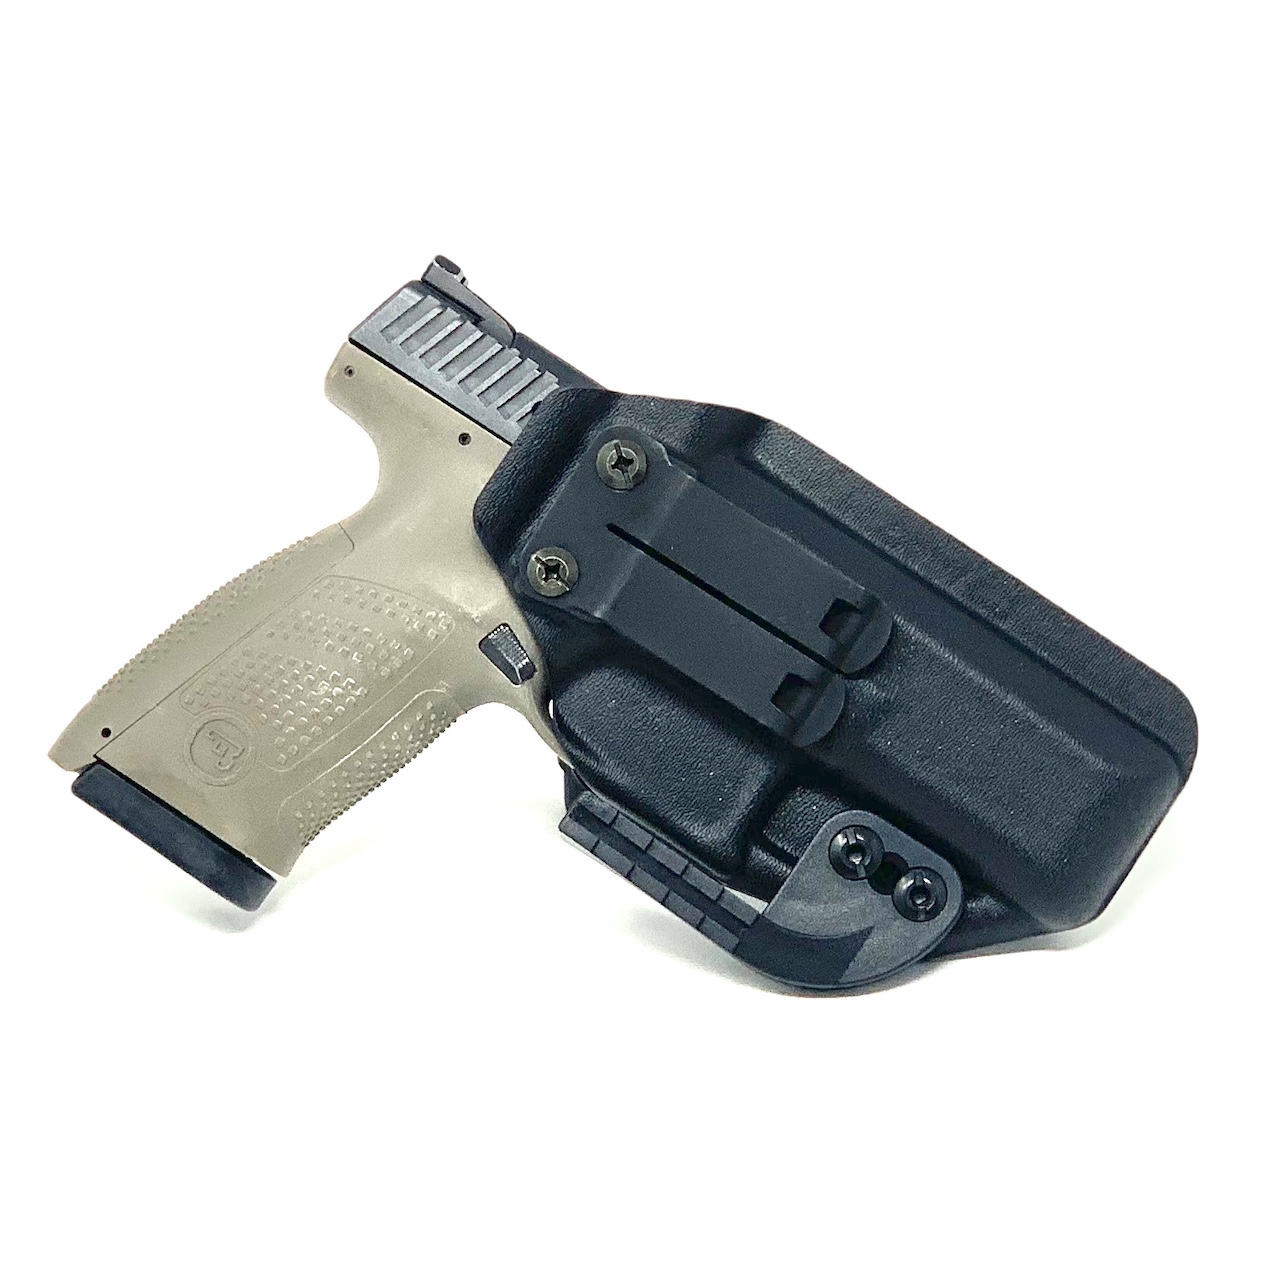 CZ P-10C P10C Kydex IWB Concealed Carry Holster Made In USA Sunsmith Holster 